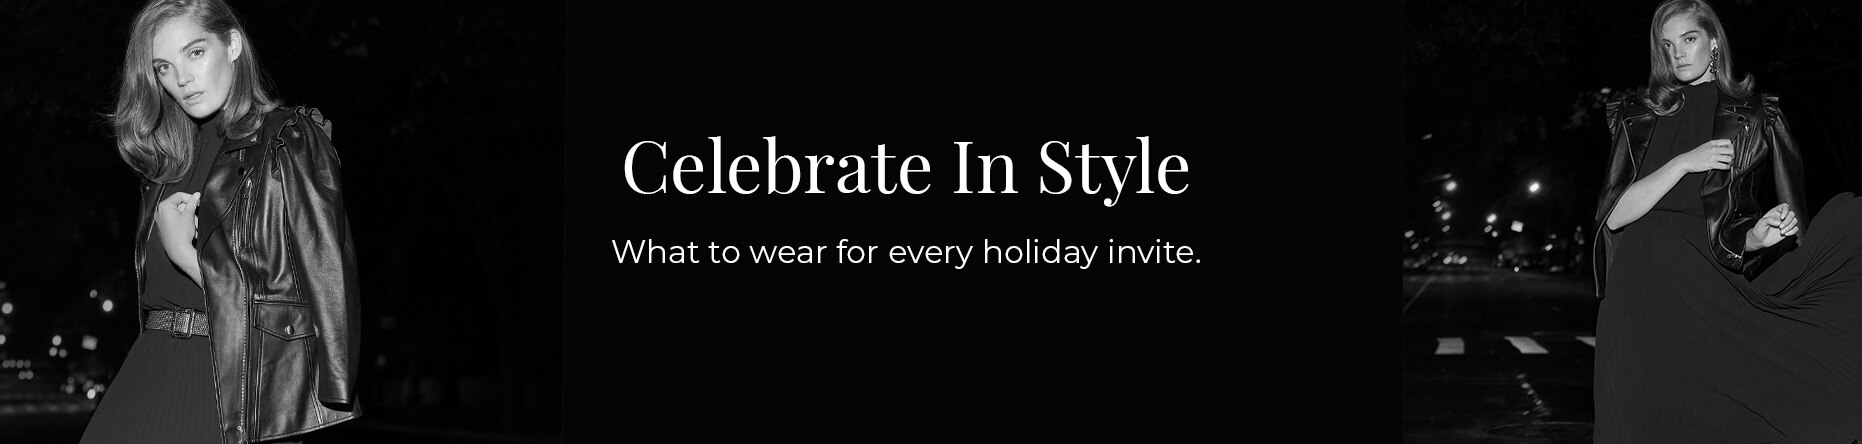 Celebrate in style. What to wear for every holiday invite.